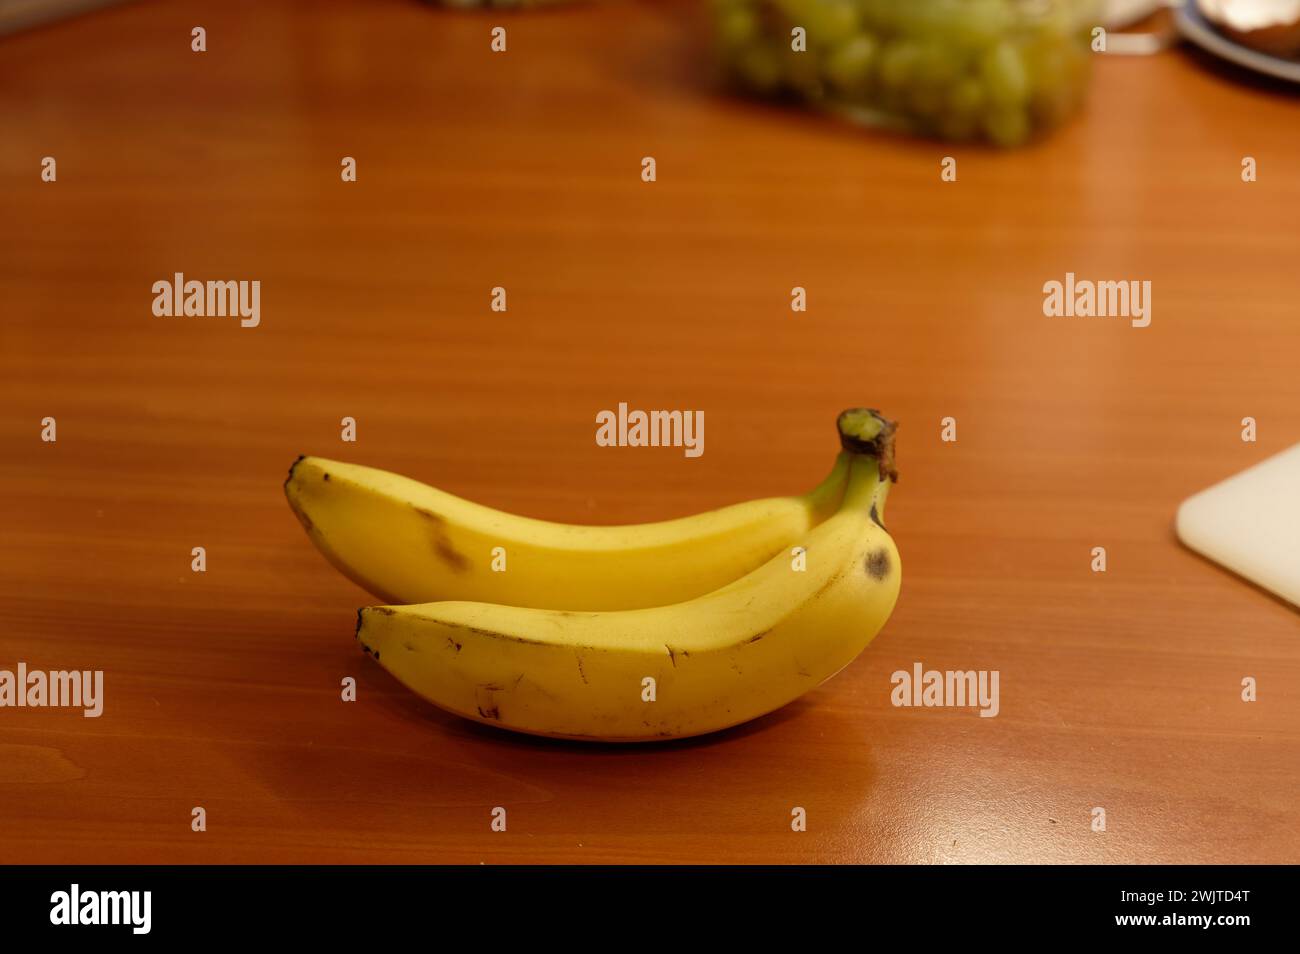 Beautiful fresh yellow banana on the table. Healthy food - fruit for a snack. Stock Photo